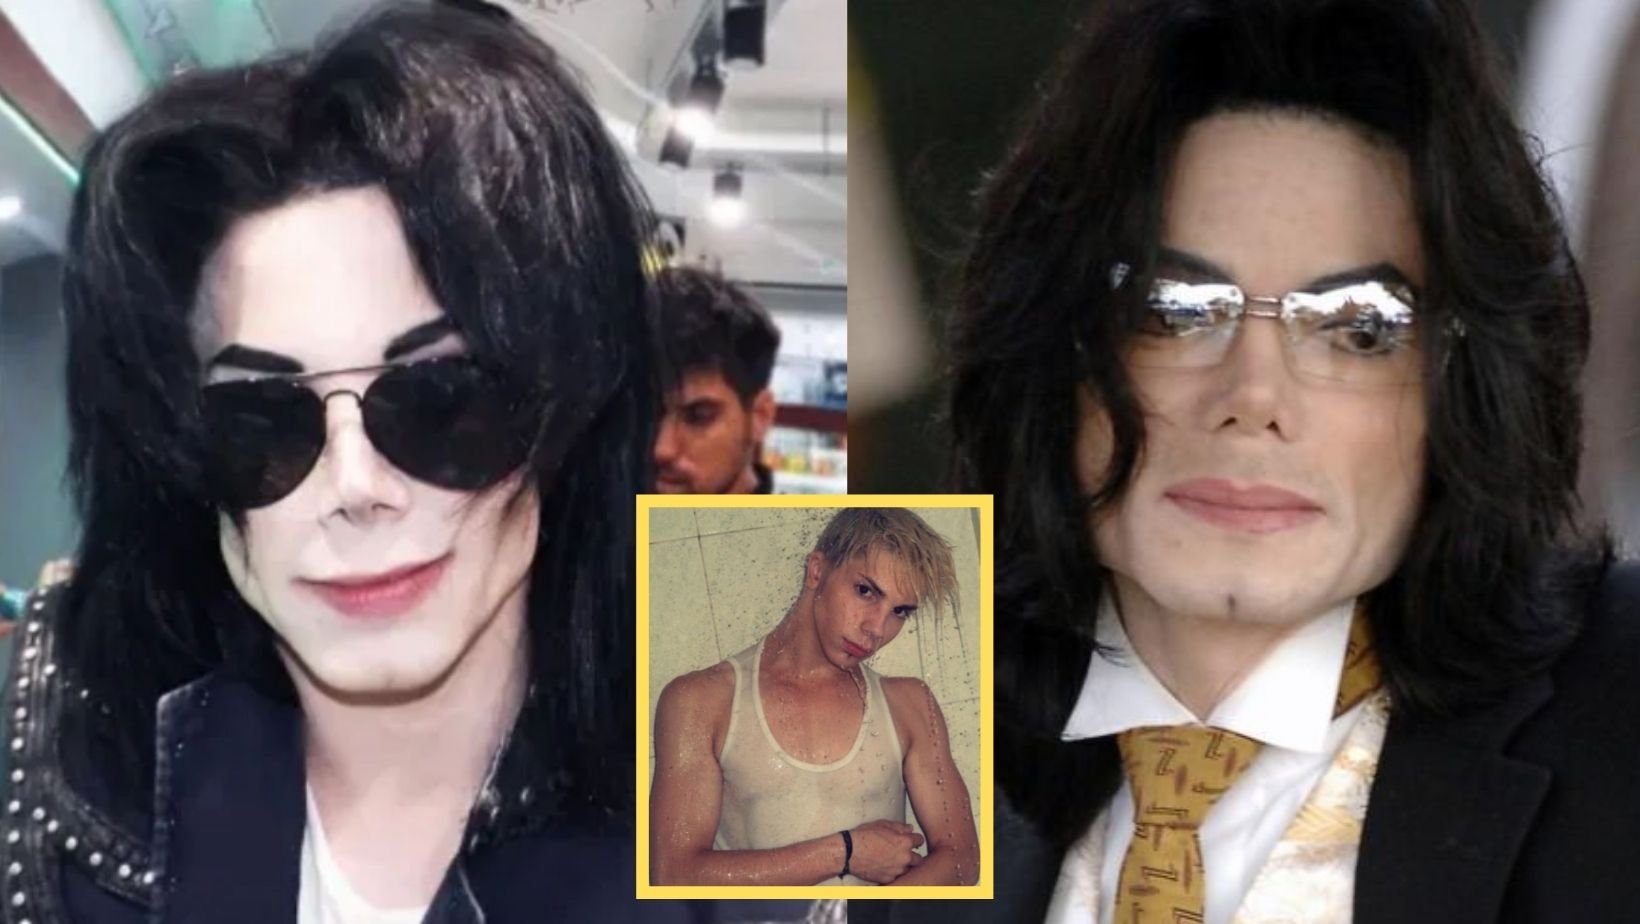 small joys thumbnail 2 1.jpg?resize=1200,630 - Youngest Michael Jackson Impersonator Spent Thousands On Surgeries Just To Look Exactly The Same As MJ